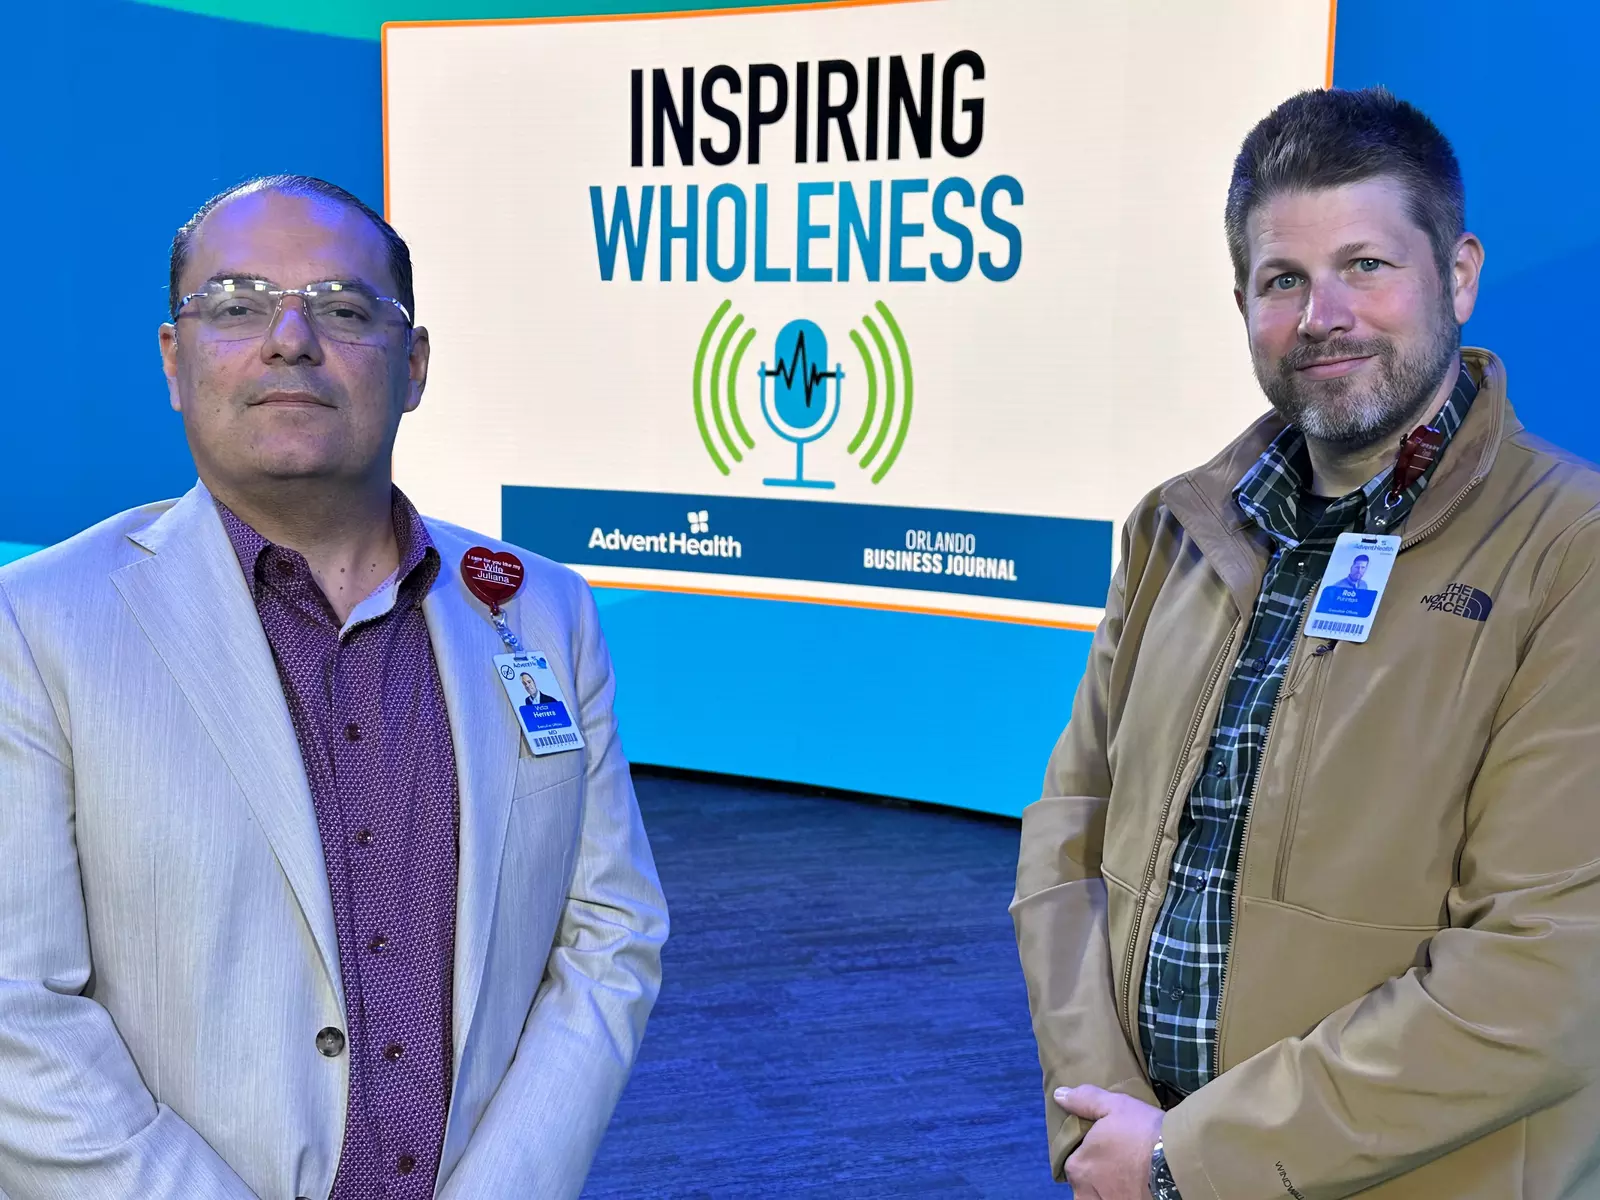 Dr. Victor Herrera and Rob Purinton appear on AdventHealth's Inspiring Wholeness podcast.